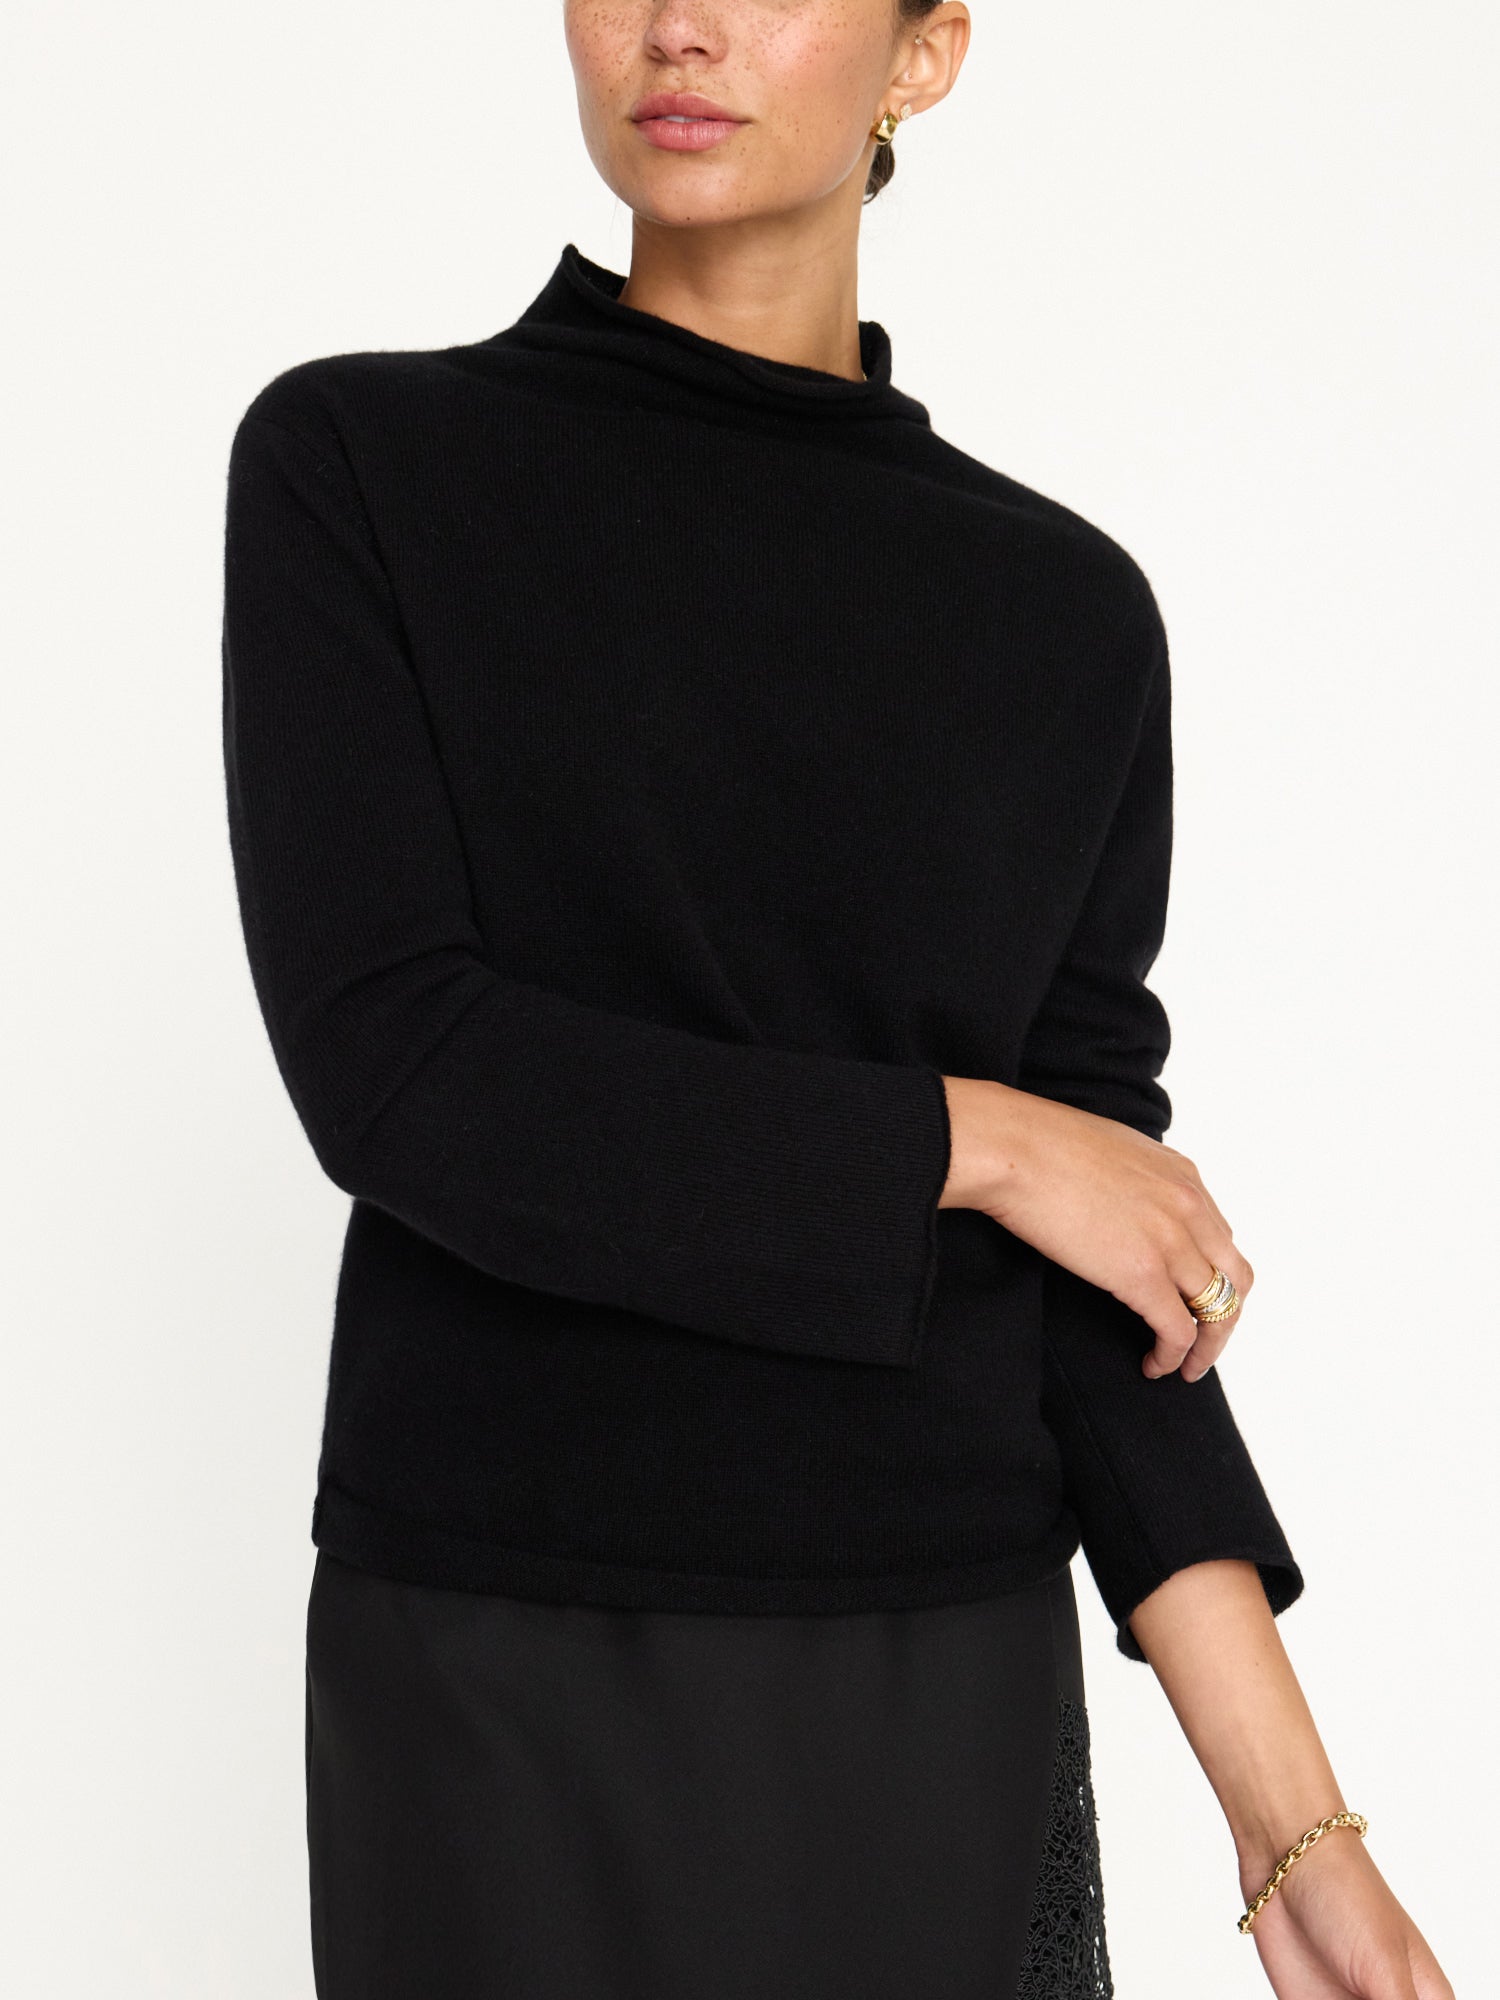 Rhone funnel neck black sweater front view 2 